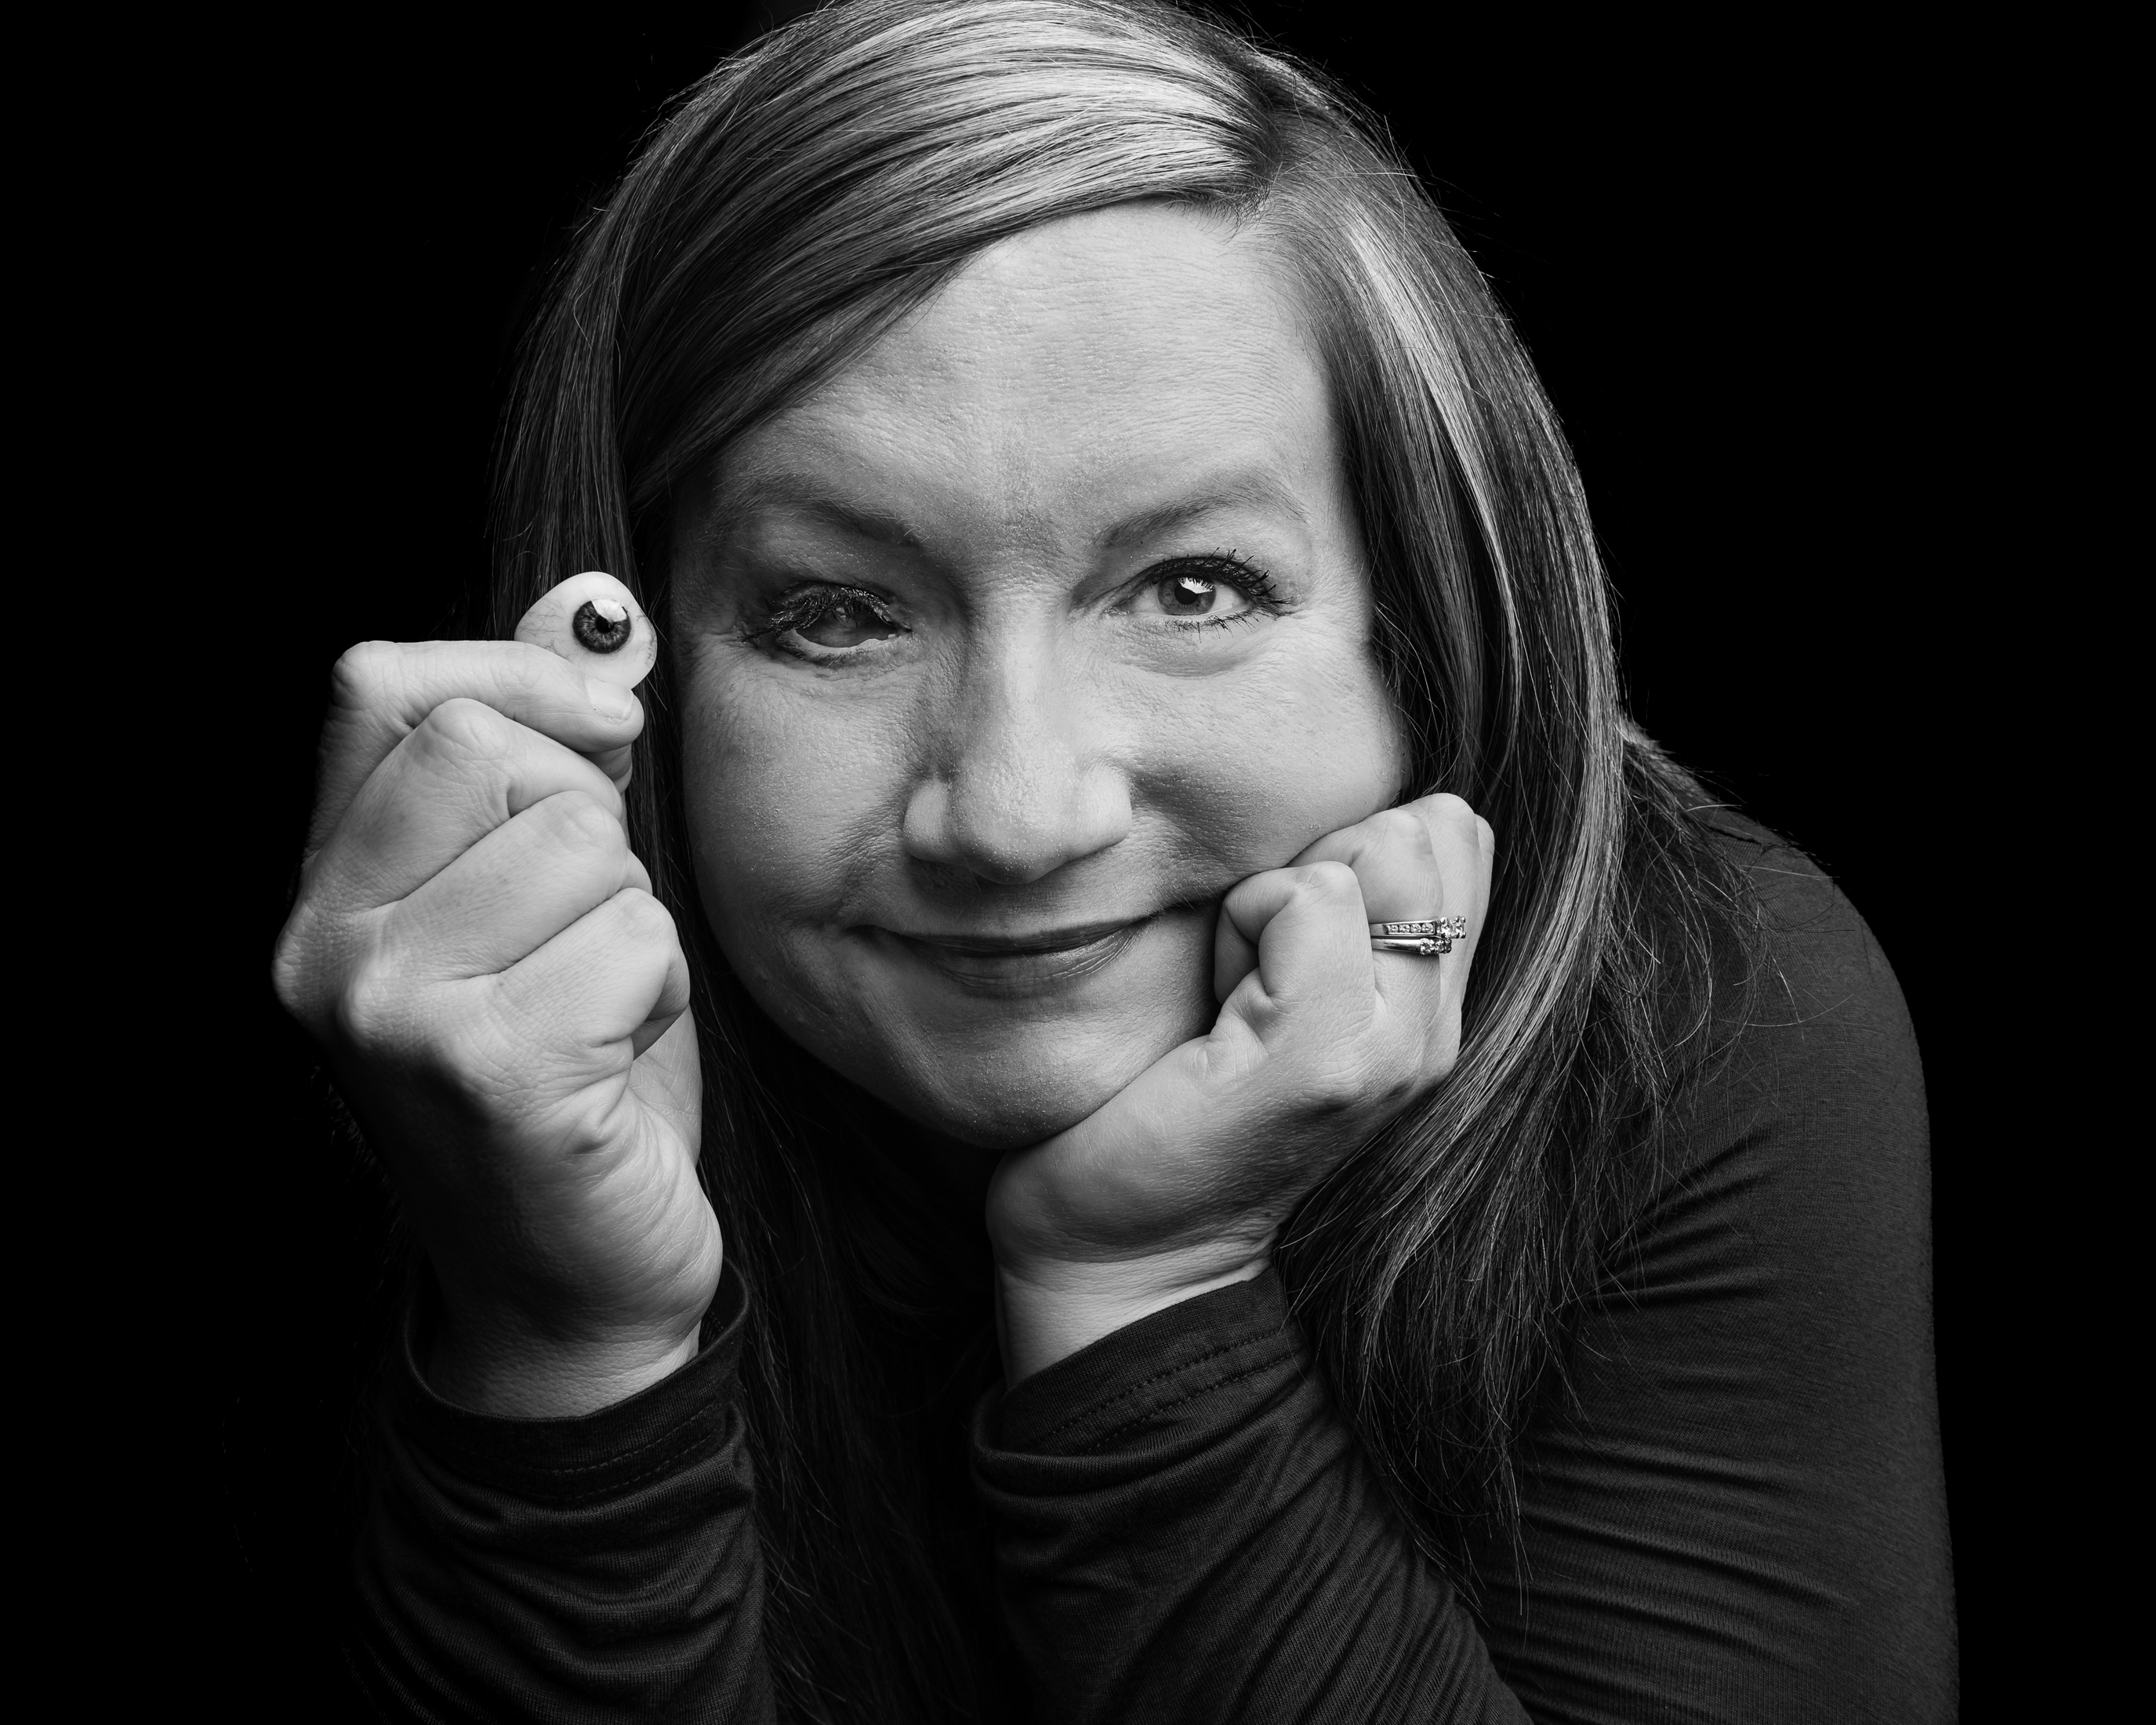 A black-and-white portrait of a woman holding up her prosthetic eye